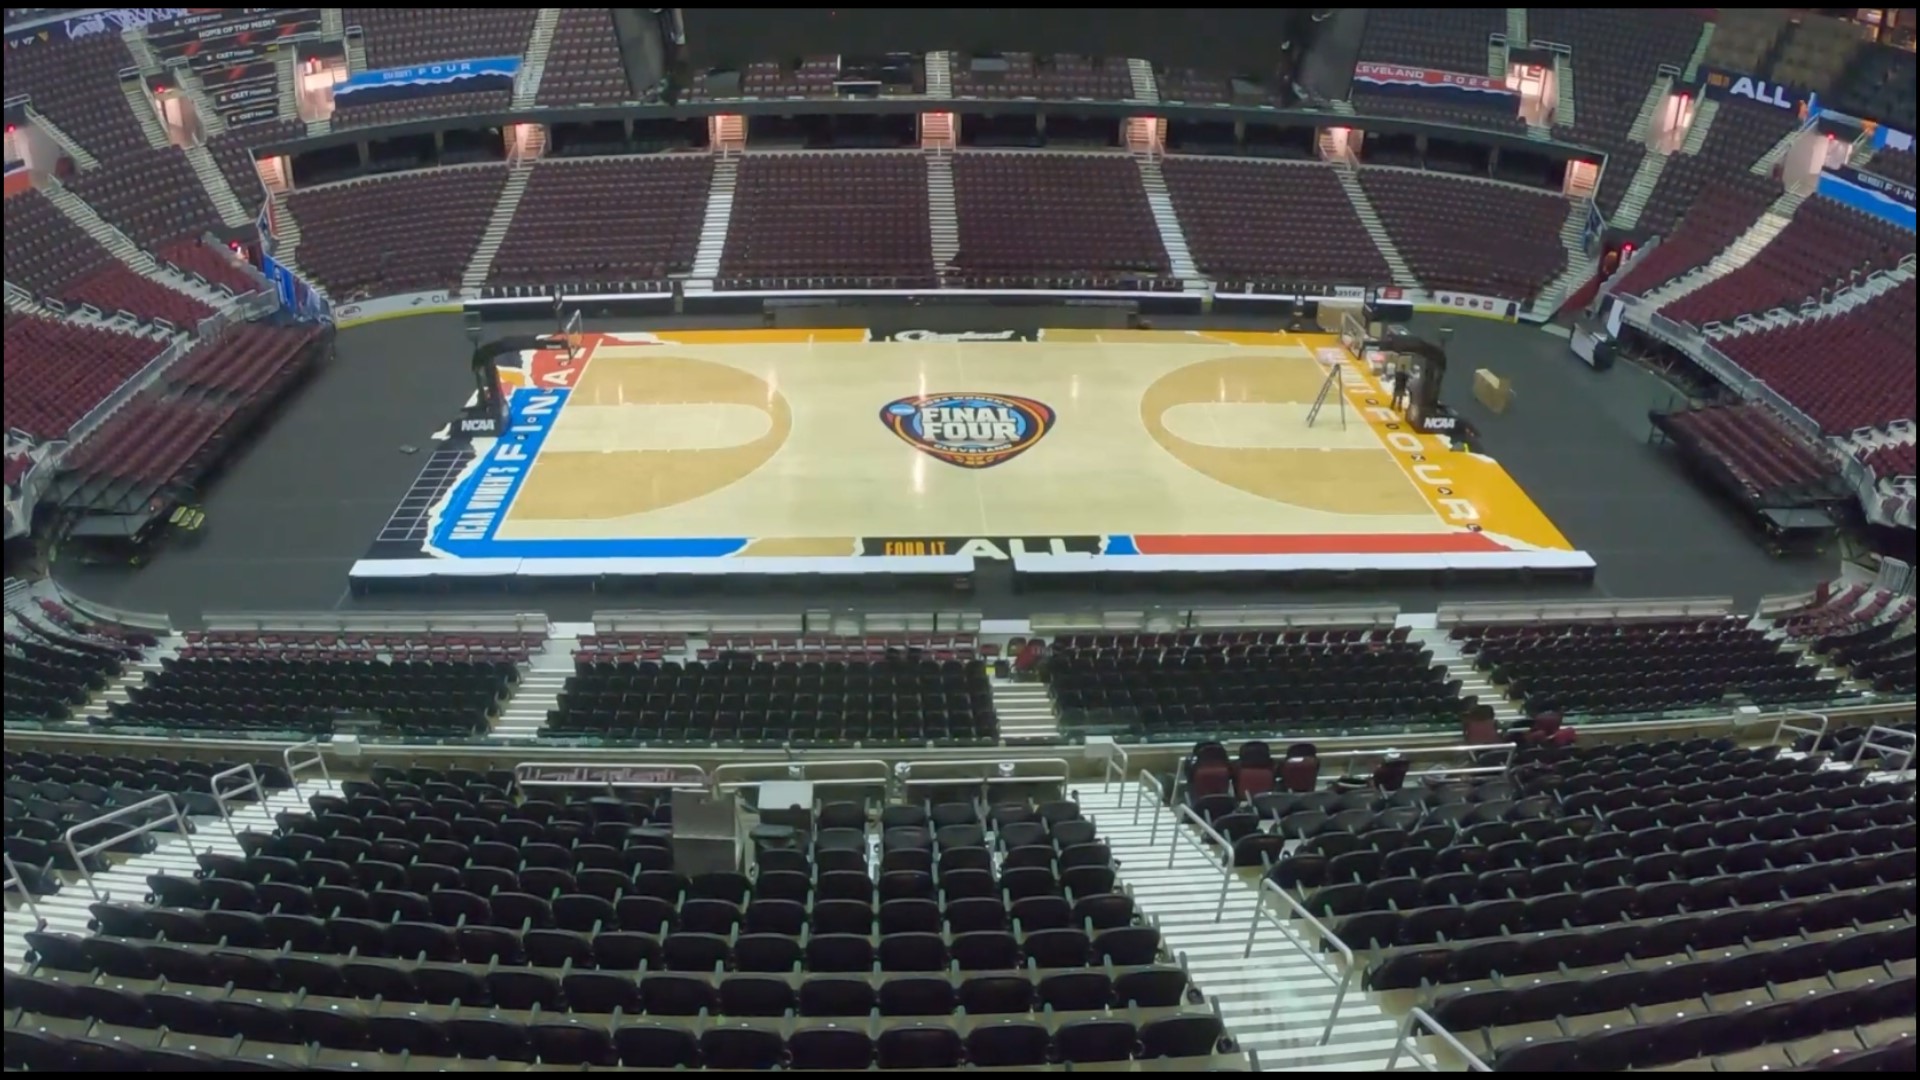 (Courtesy NCAA) Rocket Mortgage FieldHouse in Cleveland has been transformed. The NCAA shared time-lapse video of the installation of the Women's Final Four court.